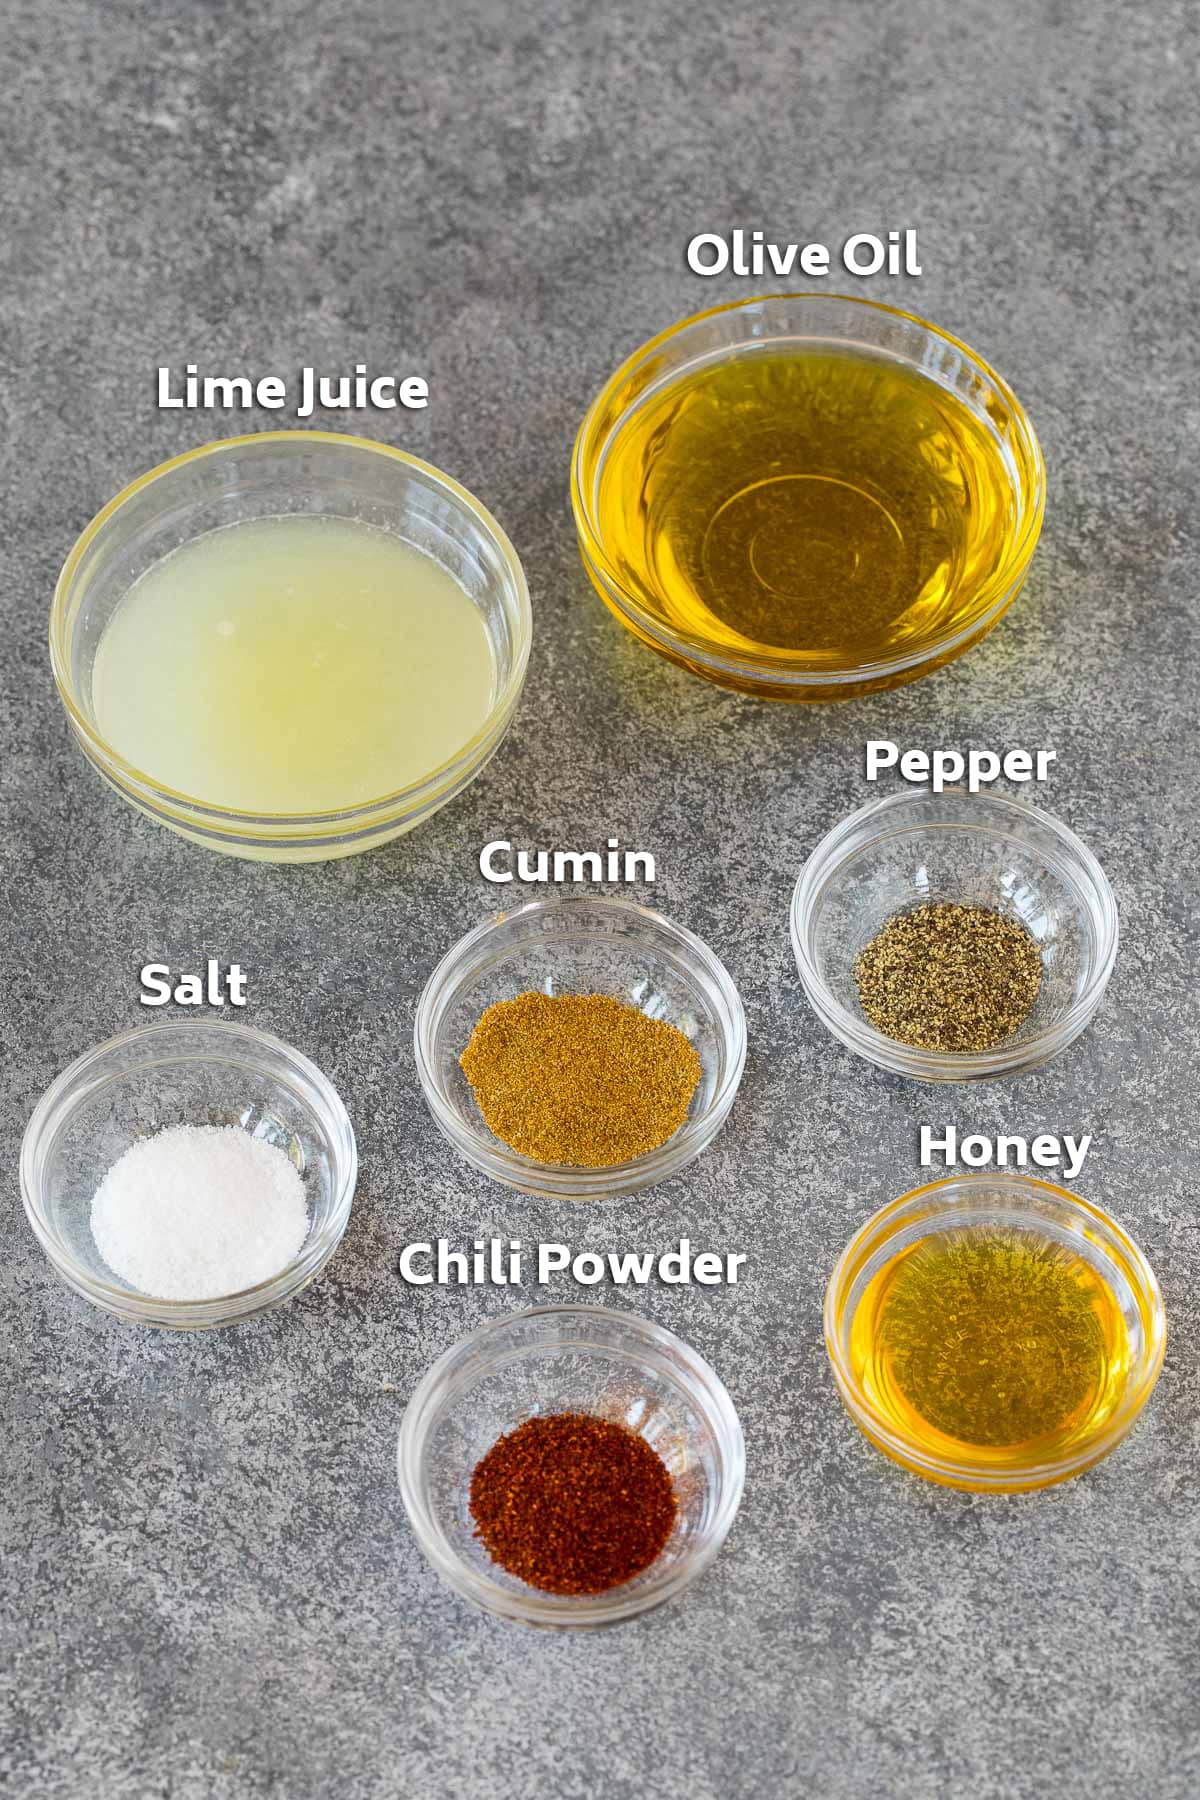 Bowls of salad dressing ingredients including olive oil, lime juice and spices.